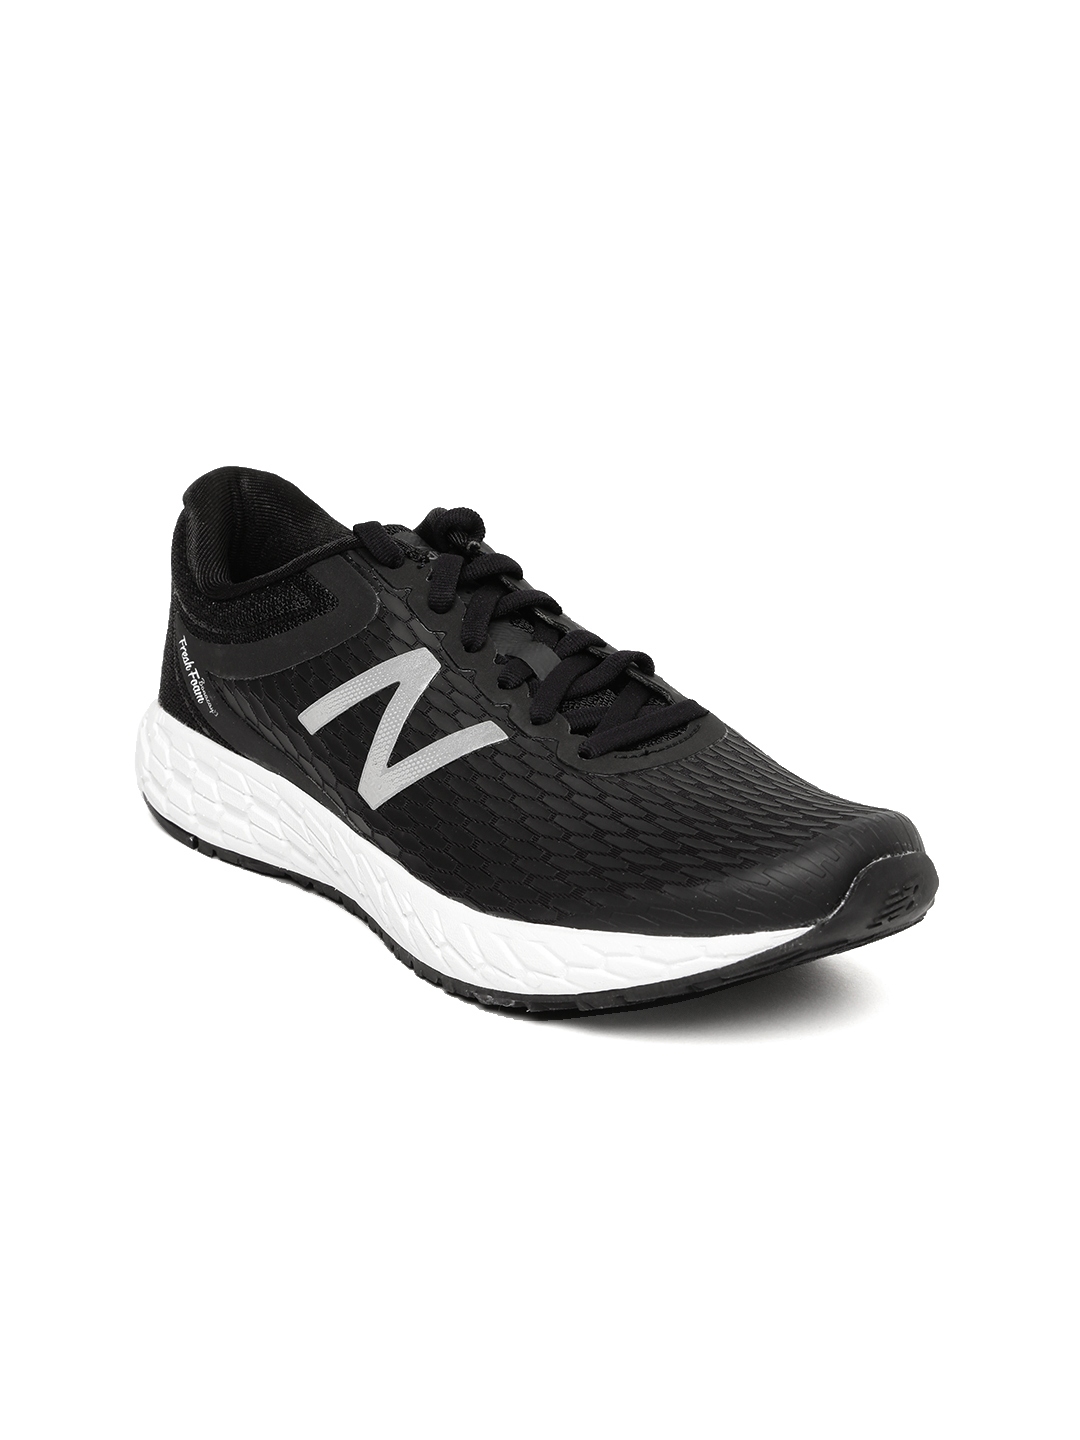 Buy New Balance Women Black Boracay Running Shoes - Sports Shoes for ...